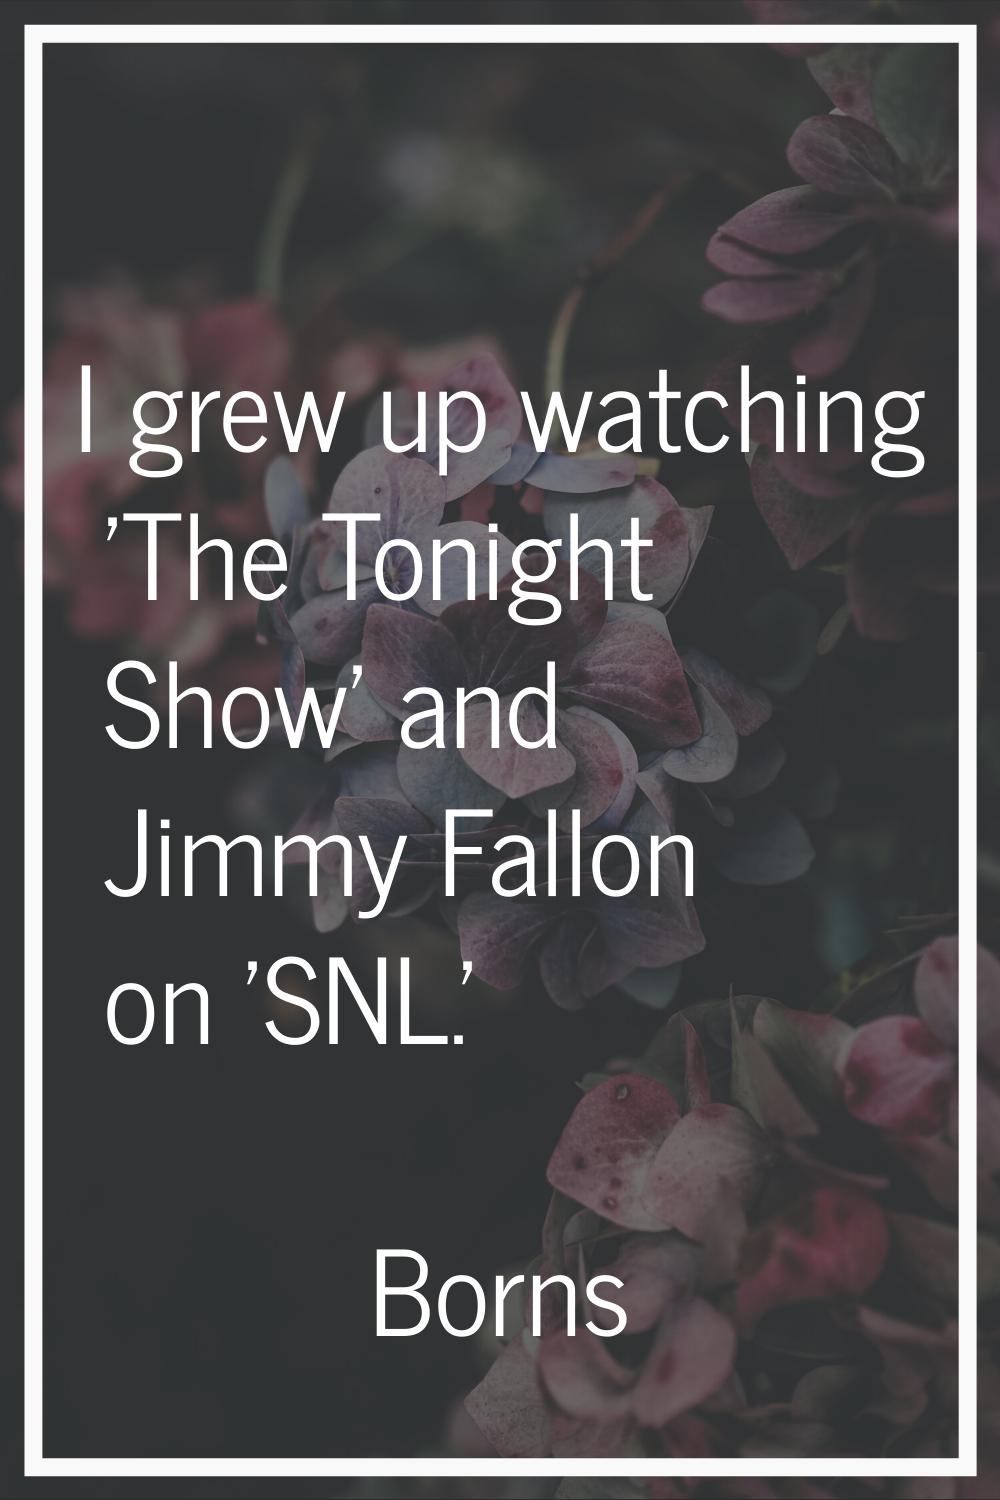 I grew up watching 'The Tonight Show' and Jimmy Fallon on 'SNL.'